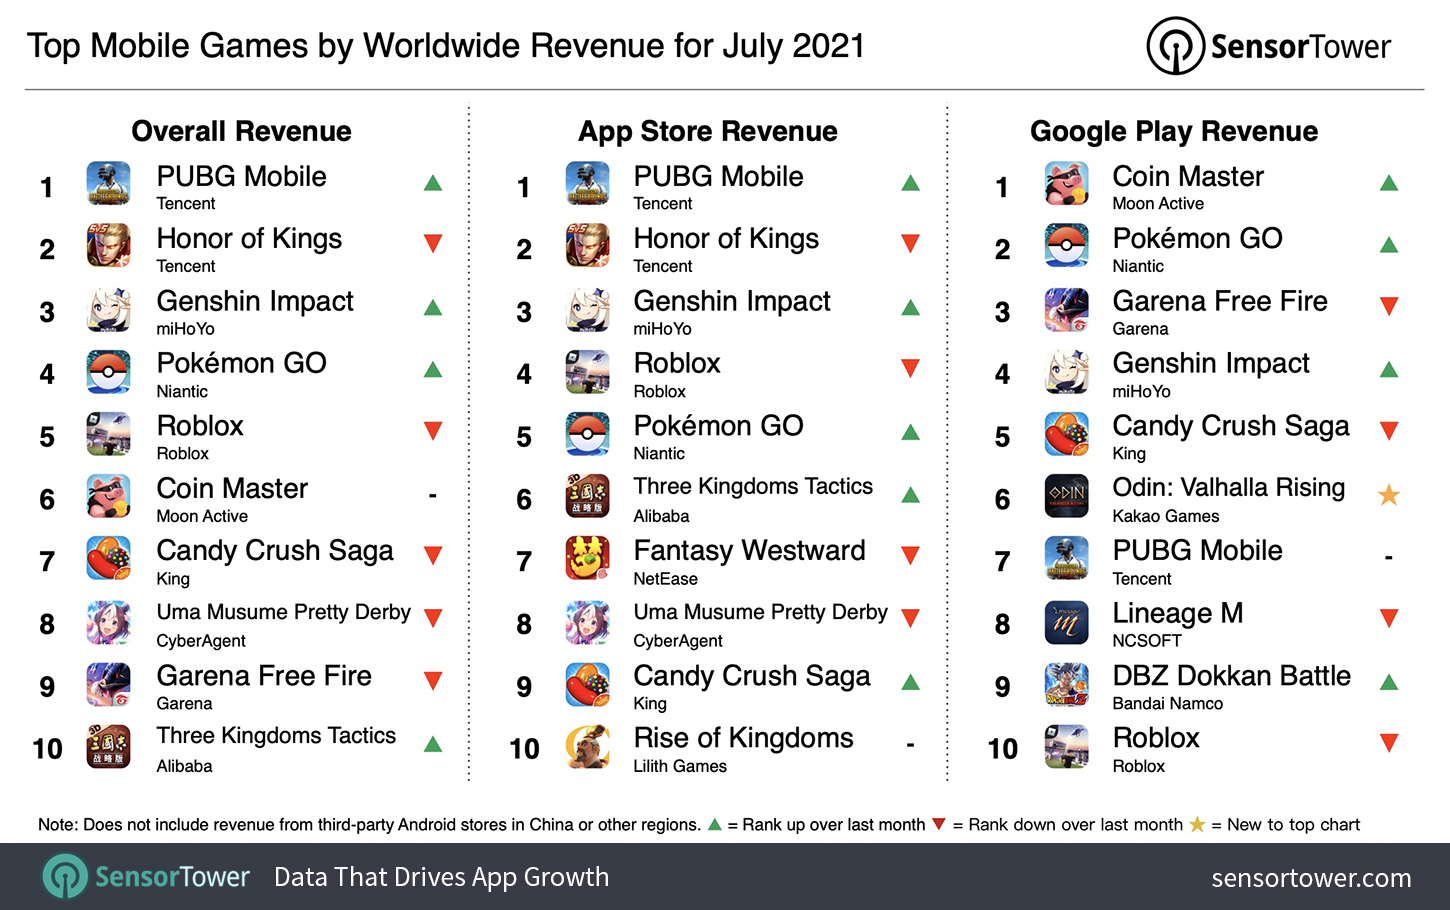 Top Grossing Mobile Games Worldwide for July 2021